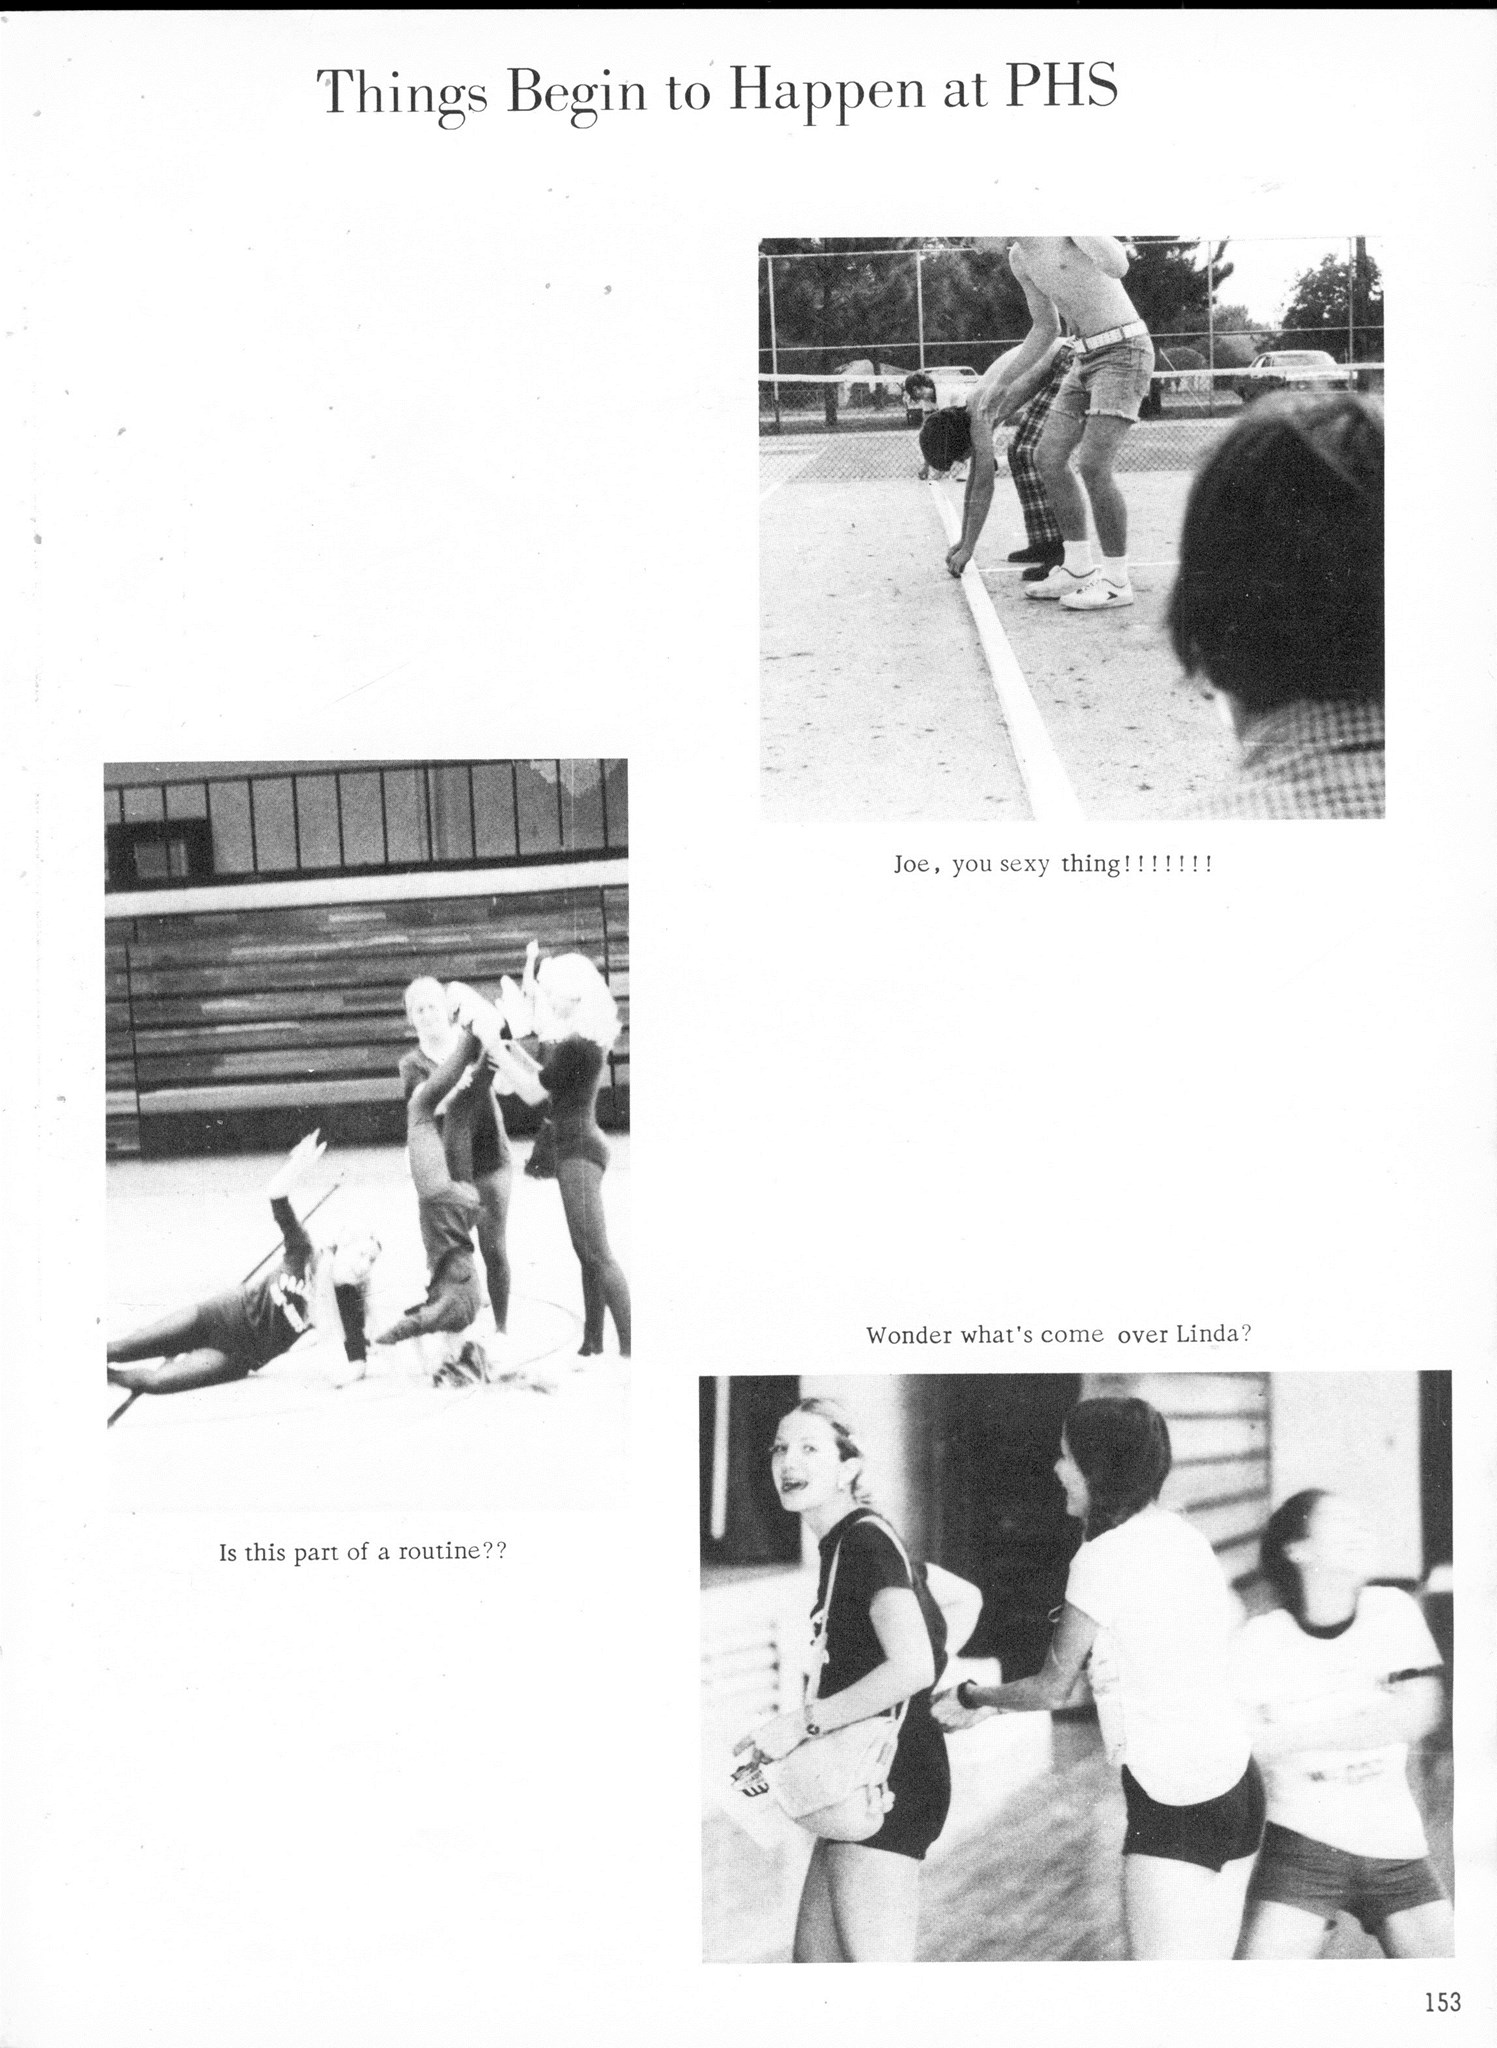 ../../../Images/Large/1976/Arclight-1976-pg0153.jpg